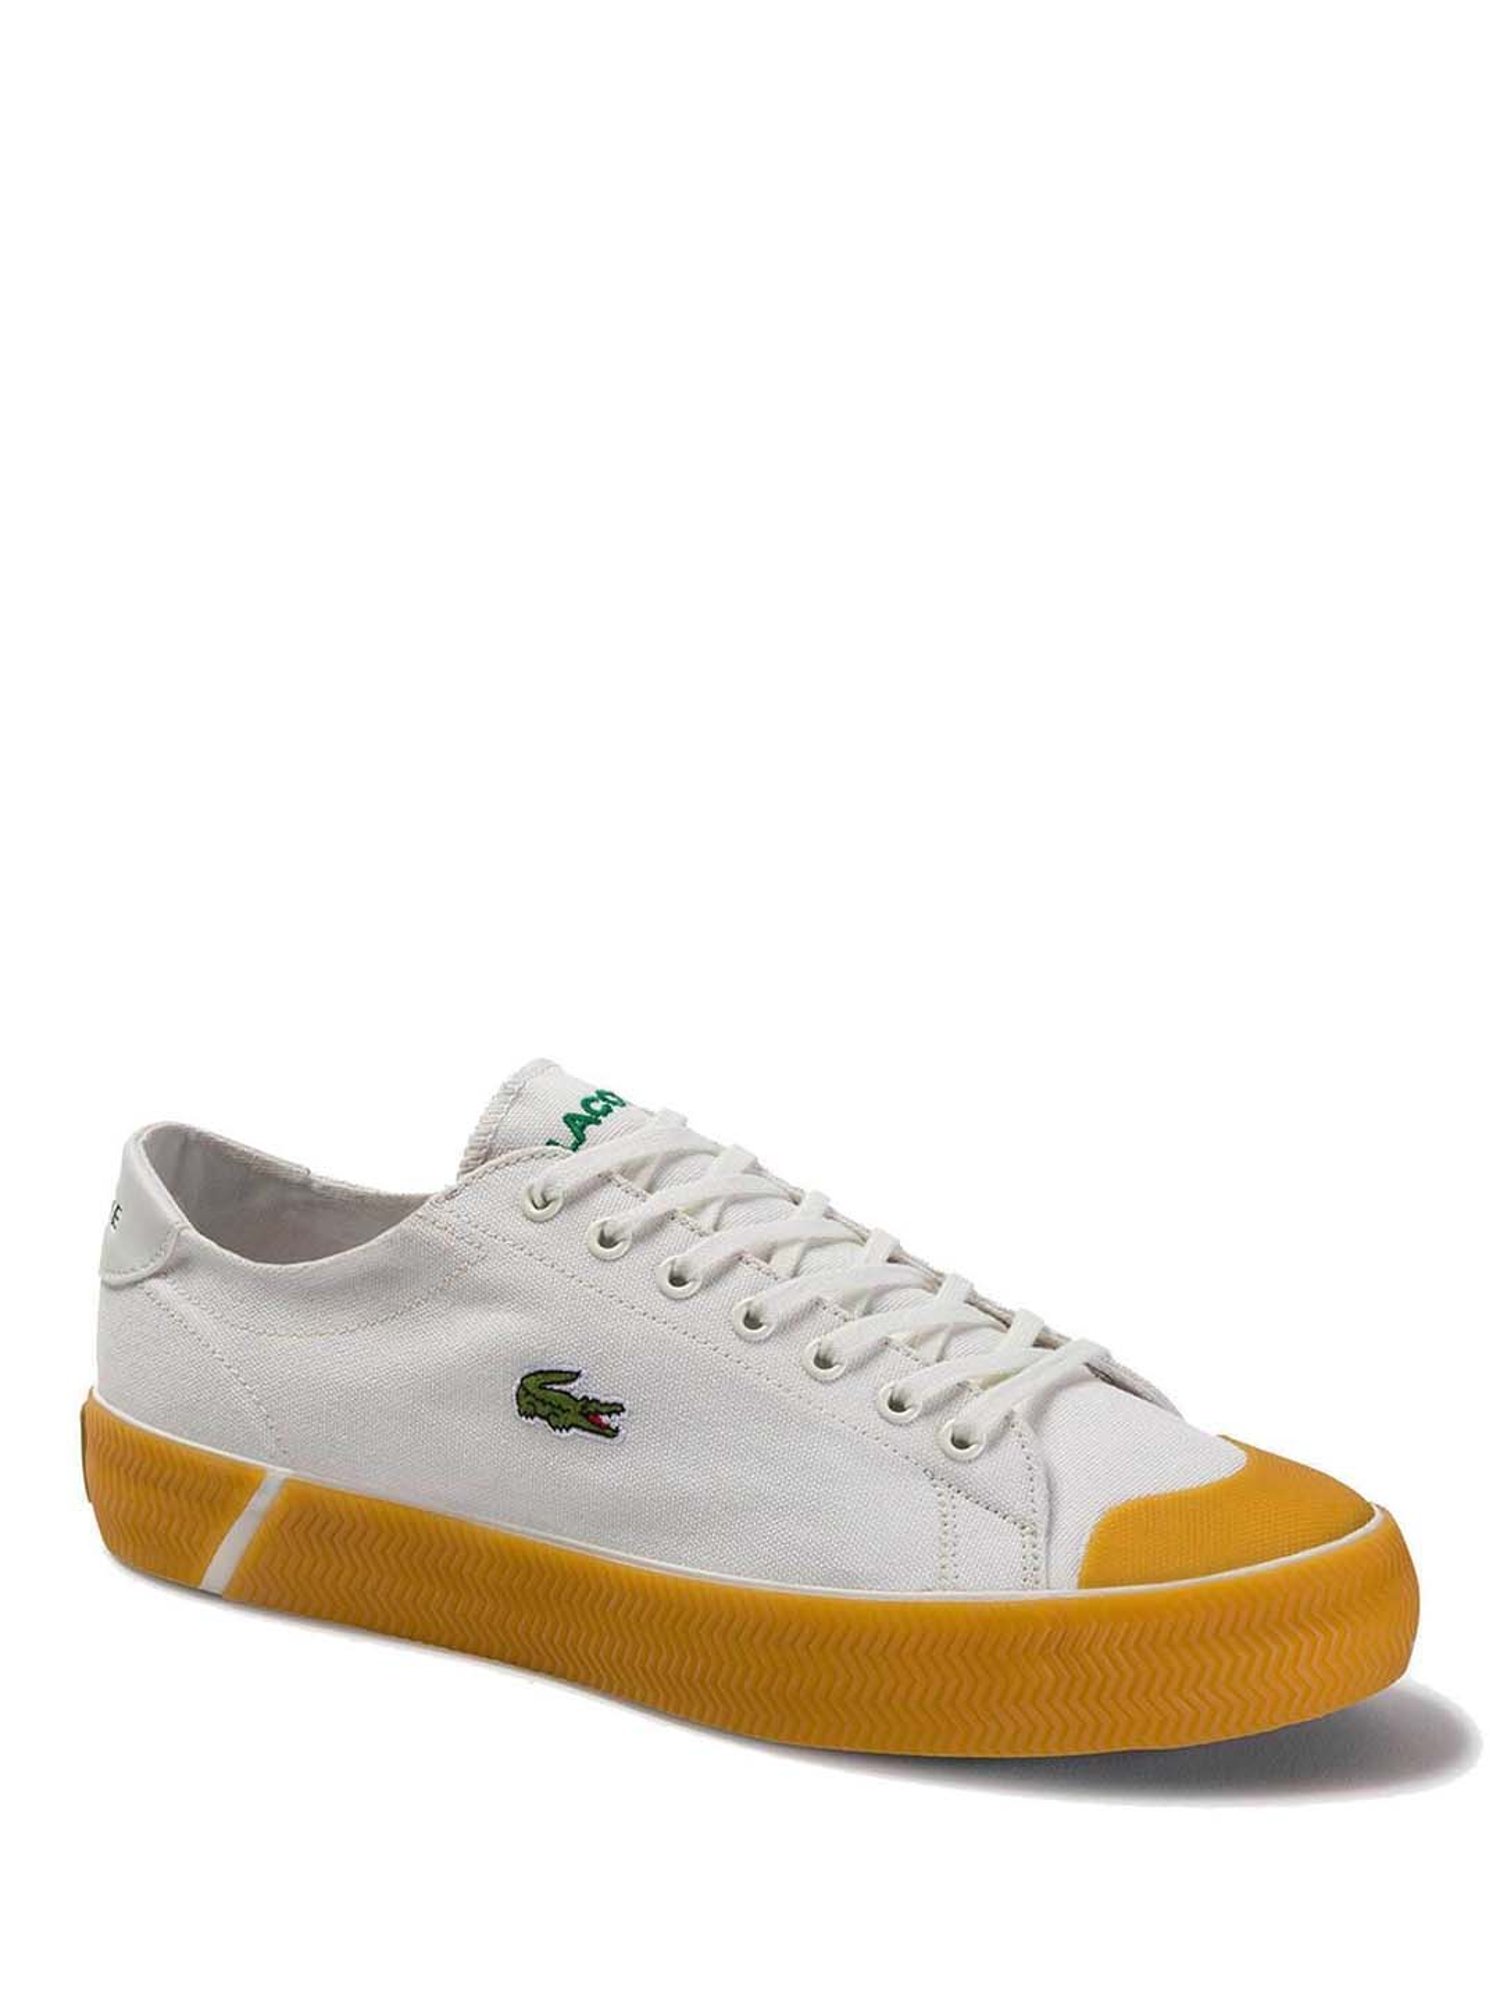 Lacoste White Gripshot Textured And Synthetic Sneakers for Men @ Tata CLiQ